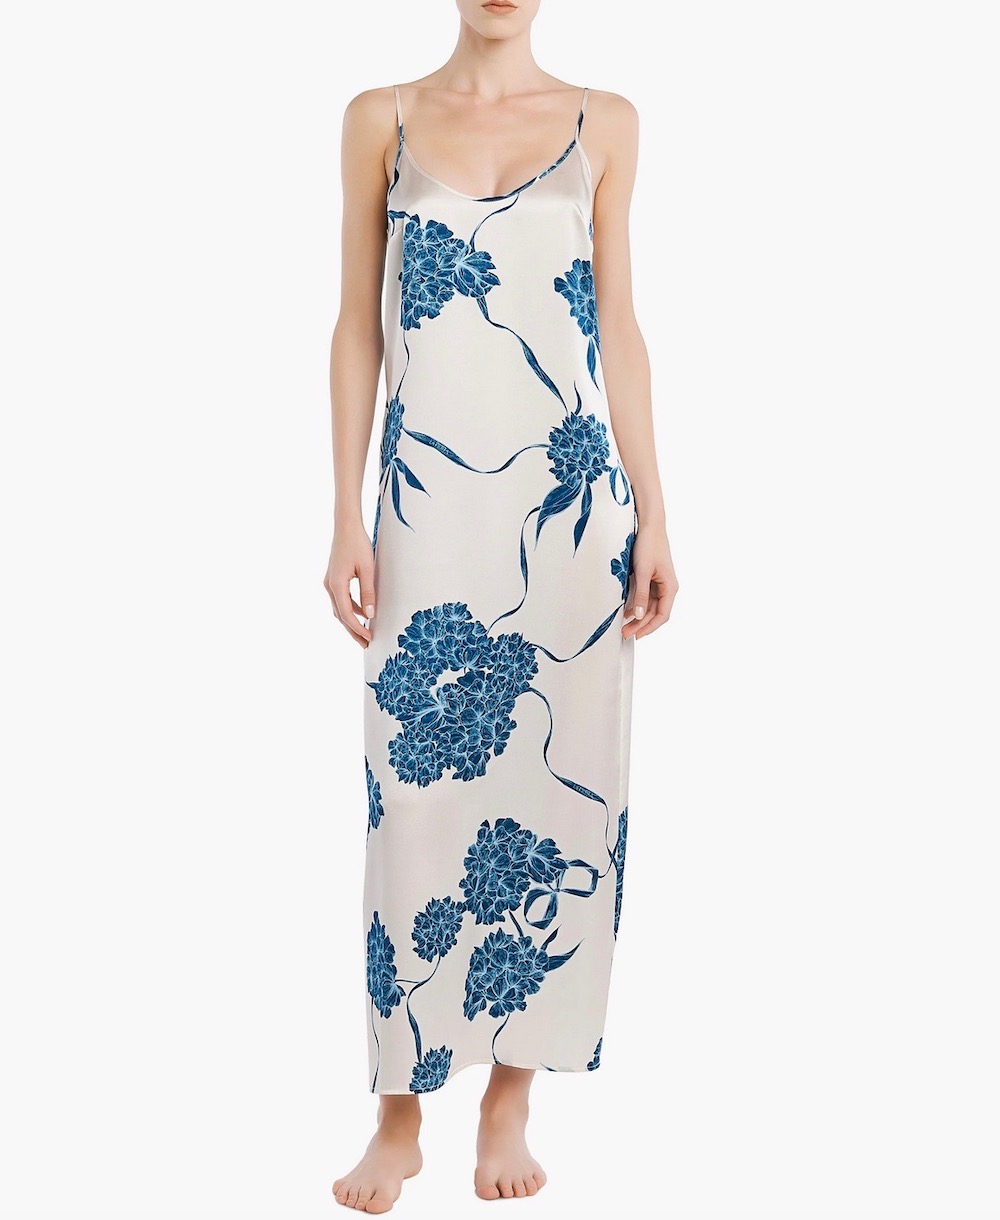 Slip Dresses to Rock This Summer - theFashionSpot